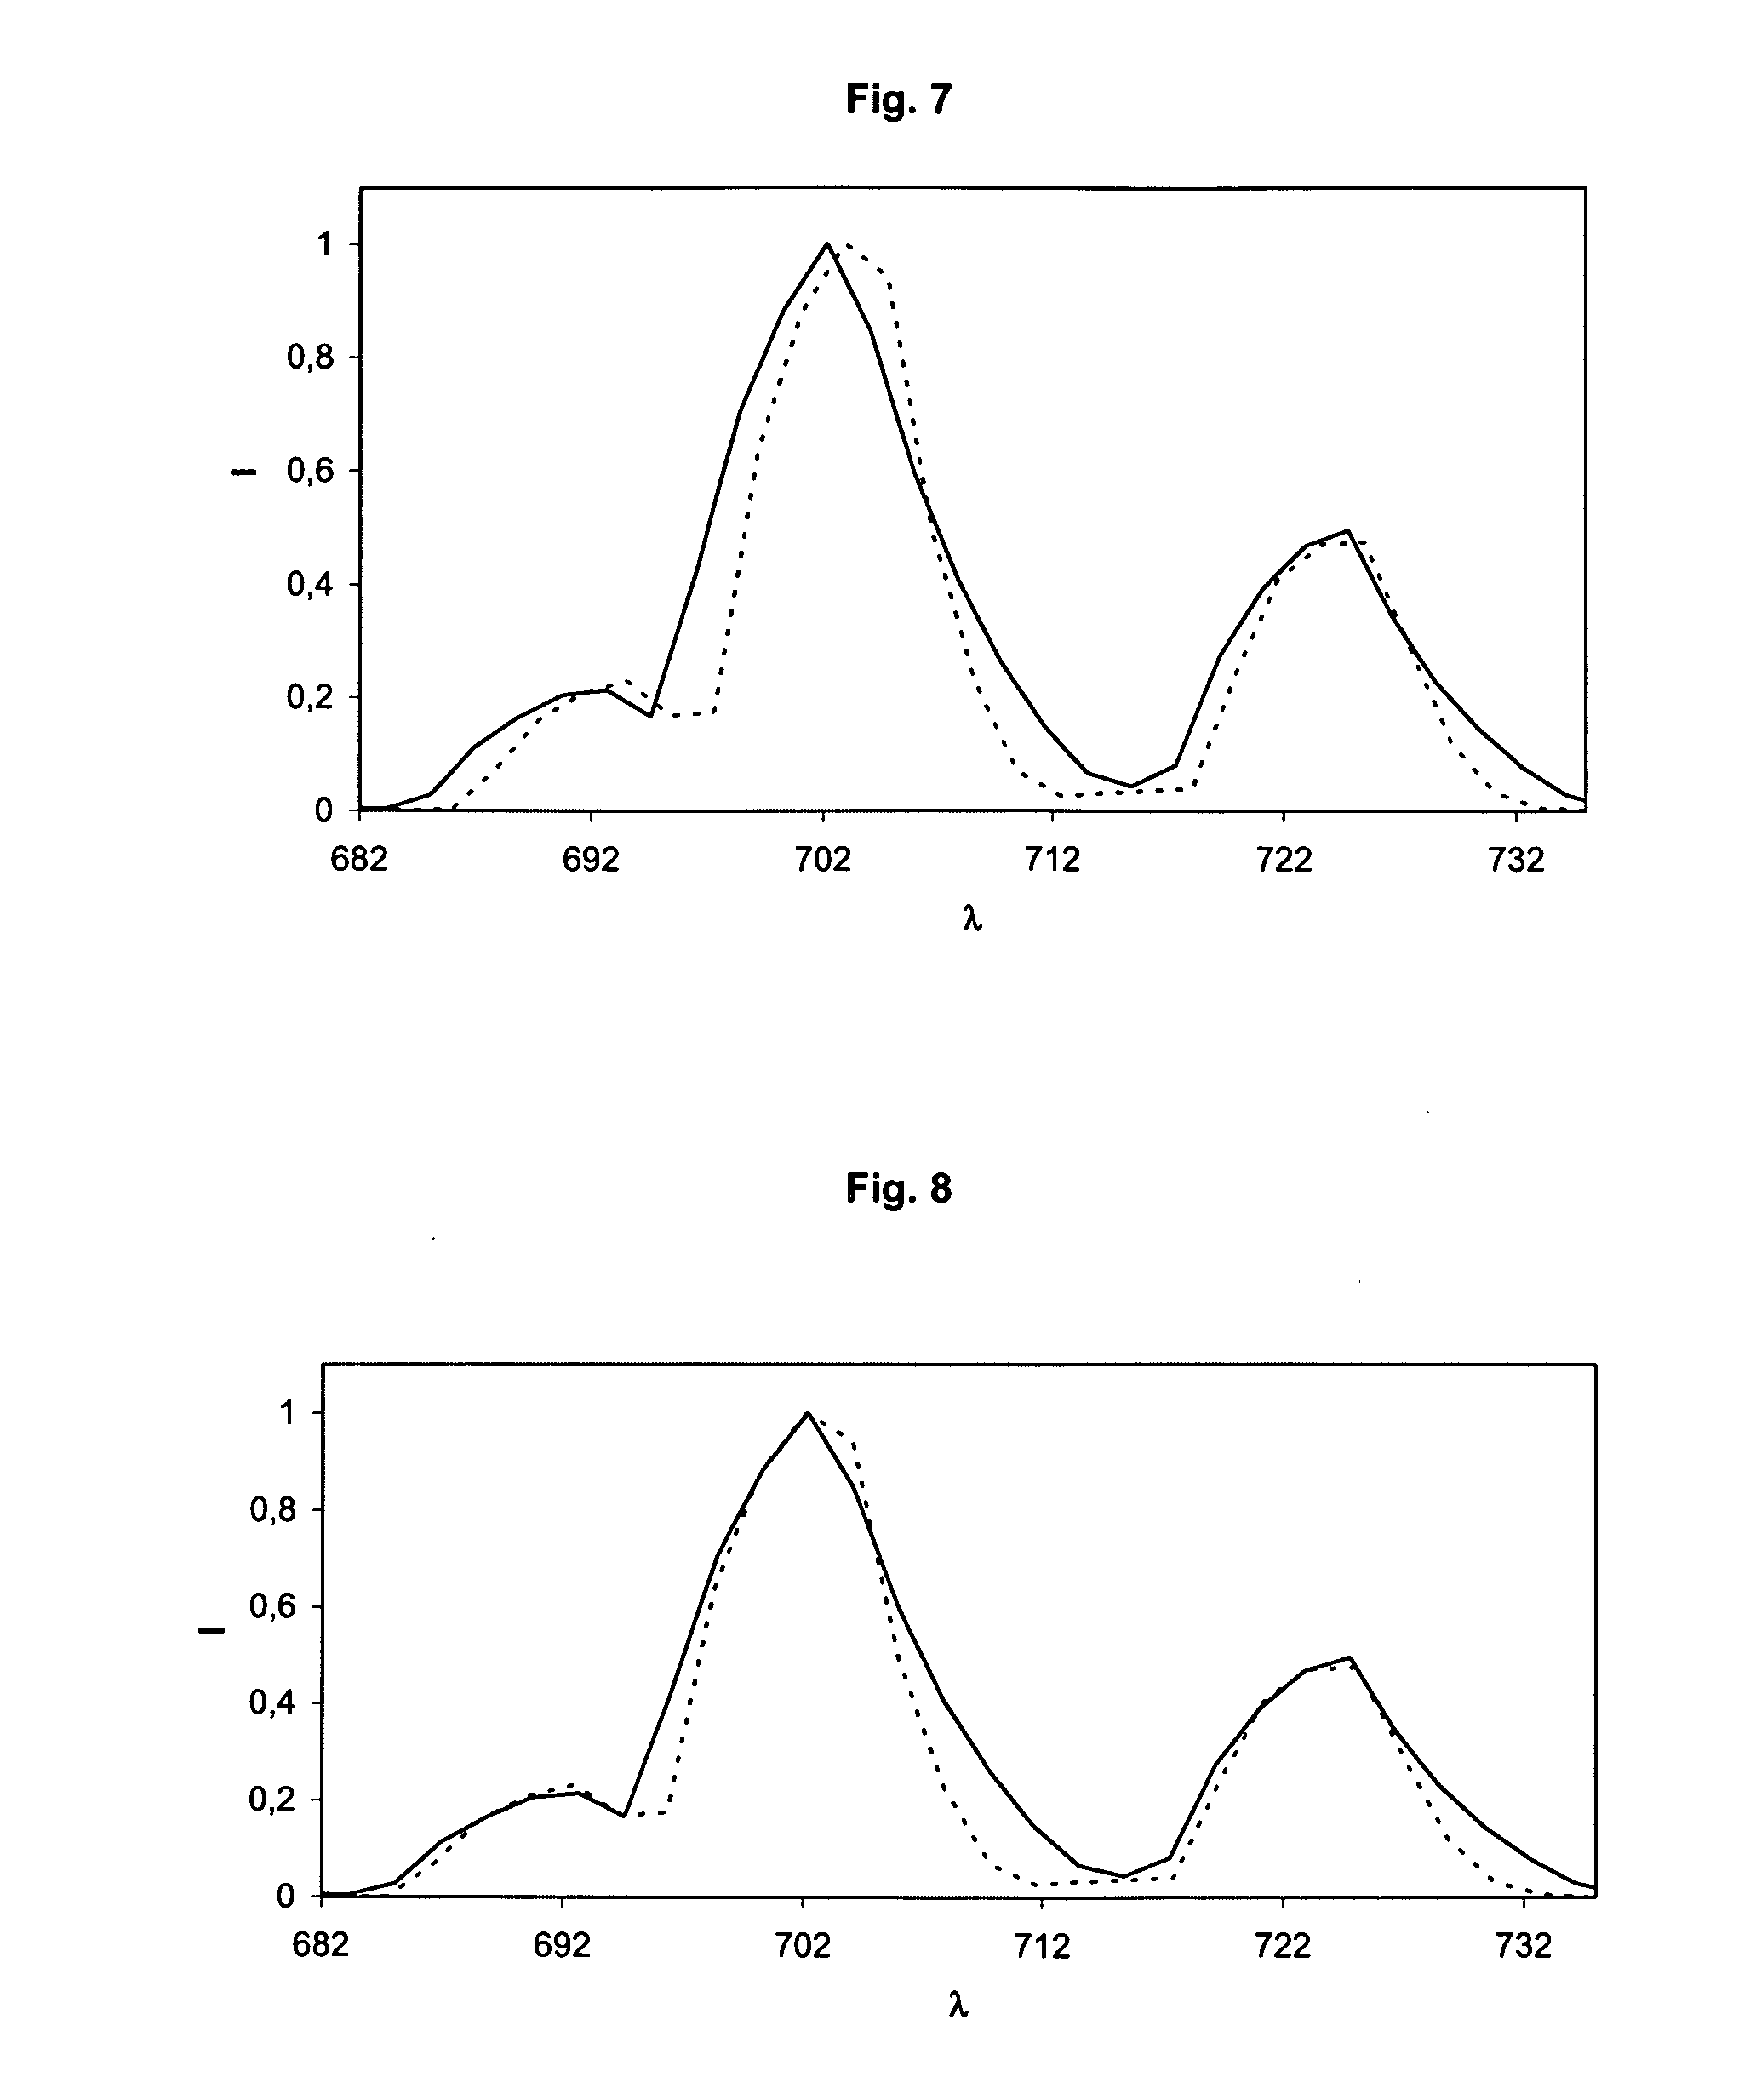 Method for the wavelength calibration of a spectrometer